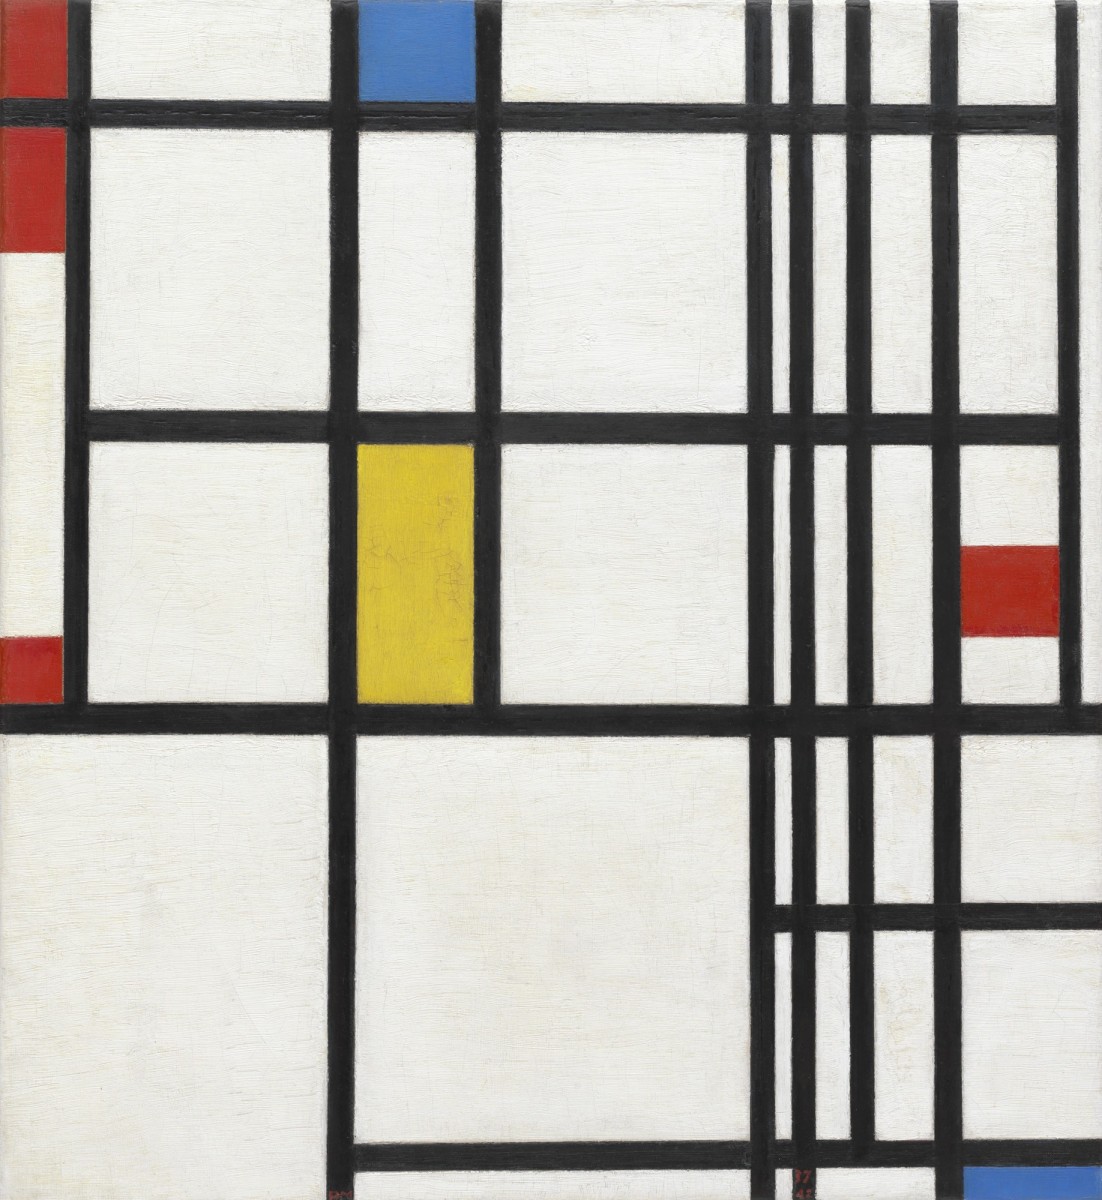 Composition in Red, Blue, and Yellow